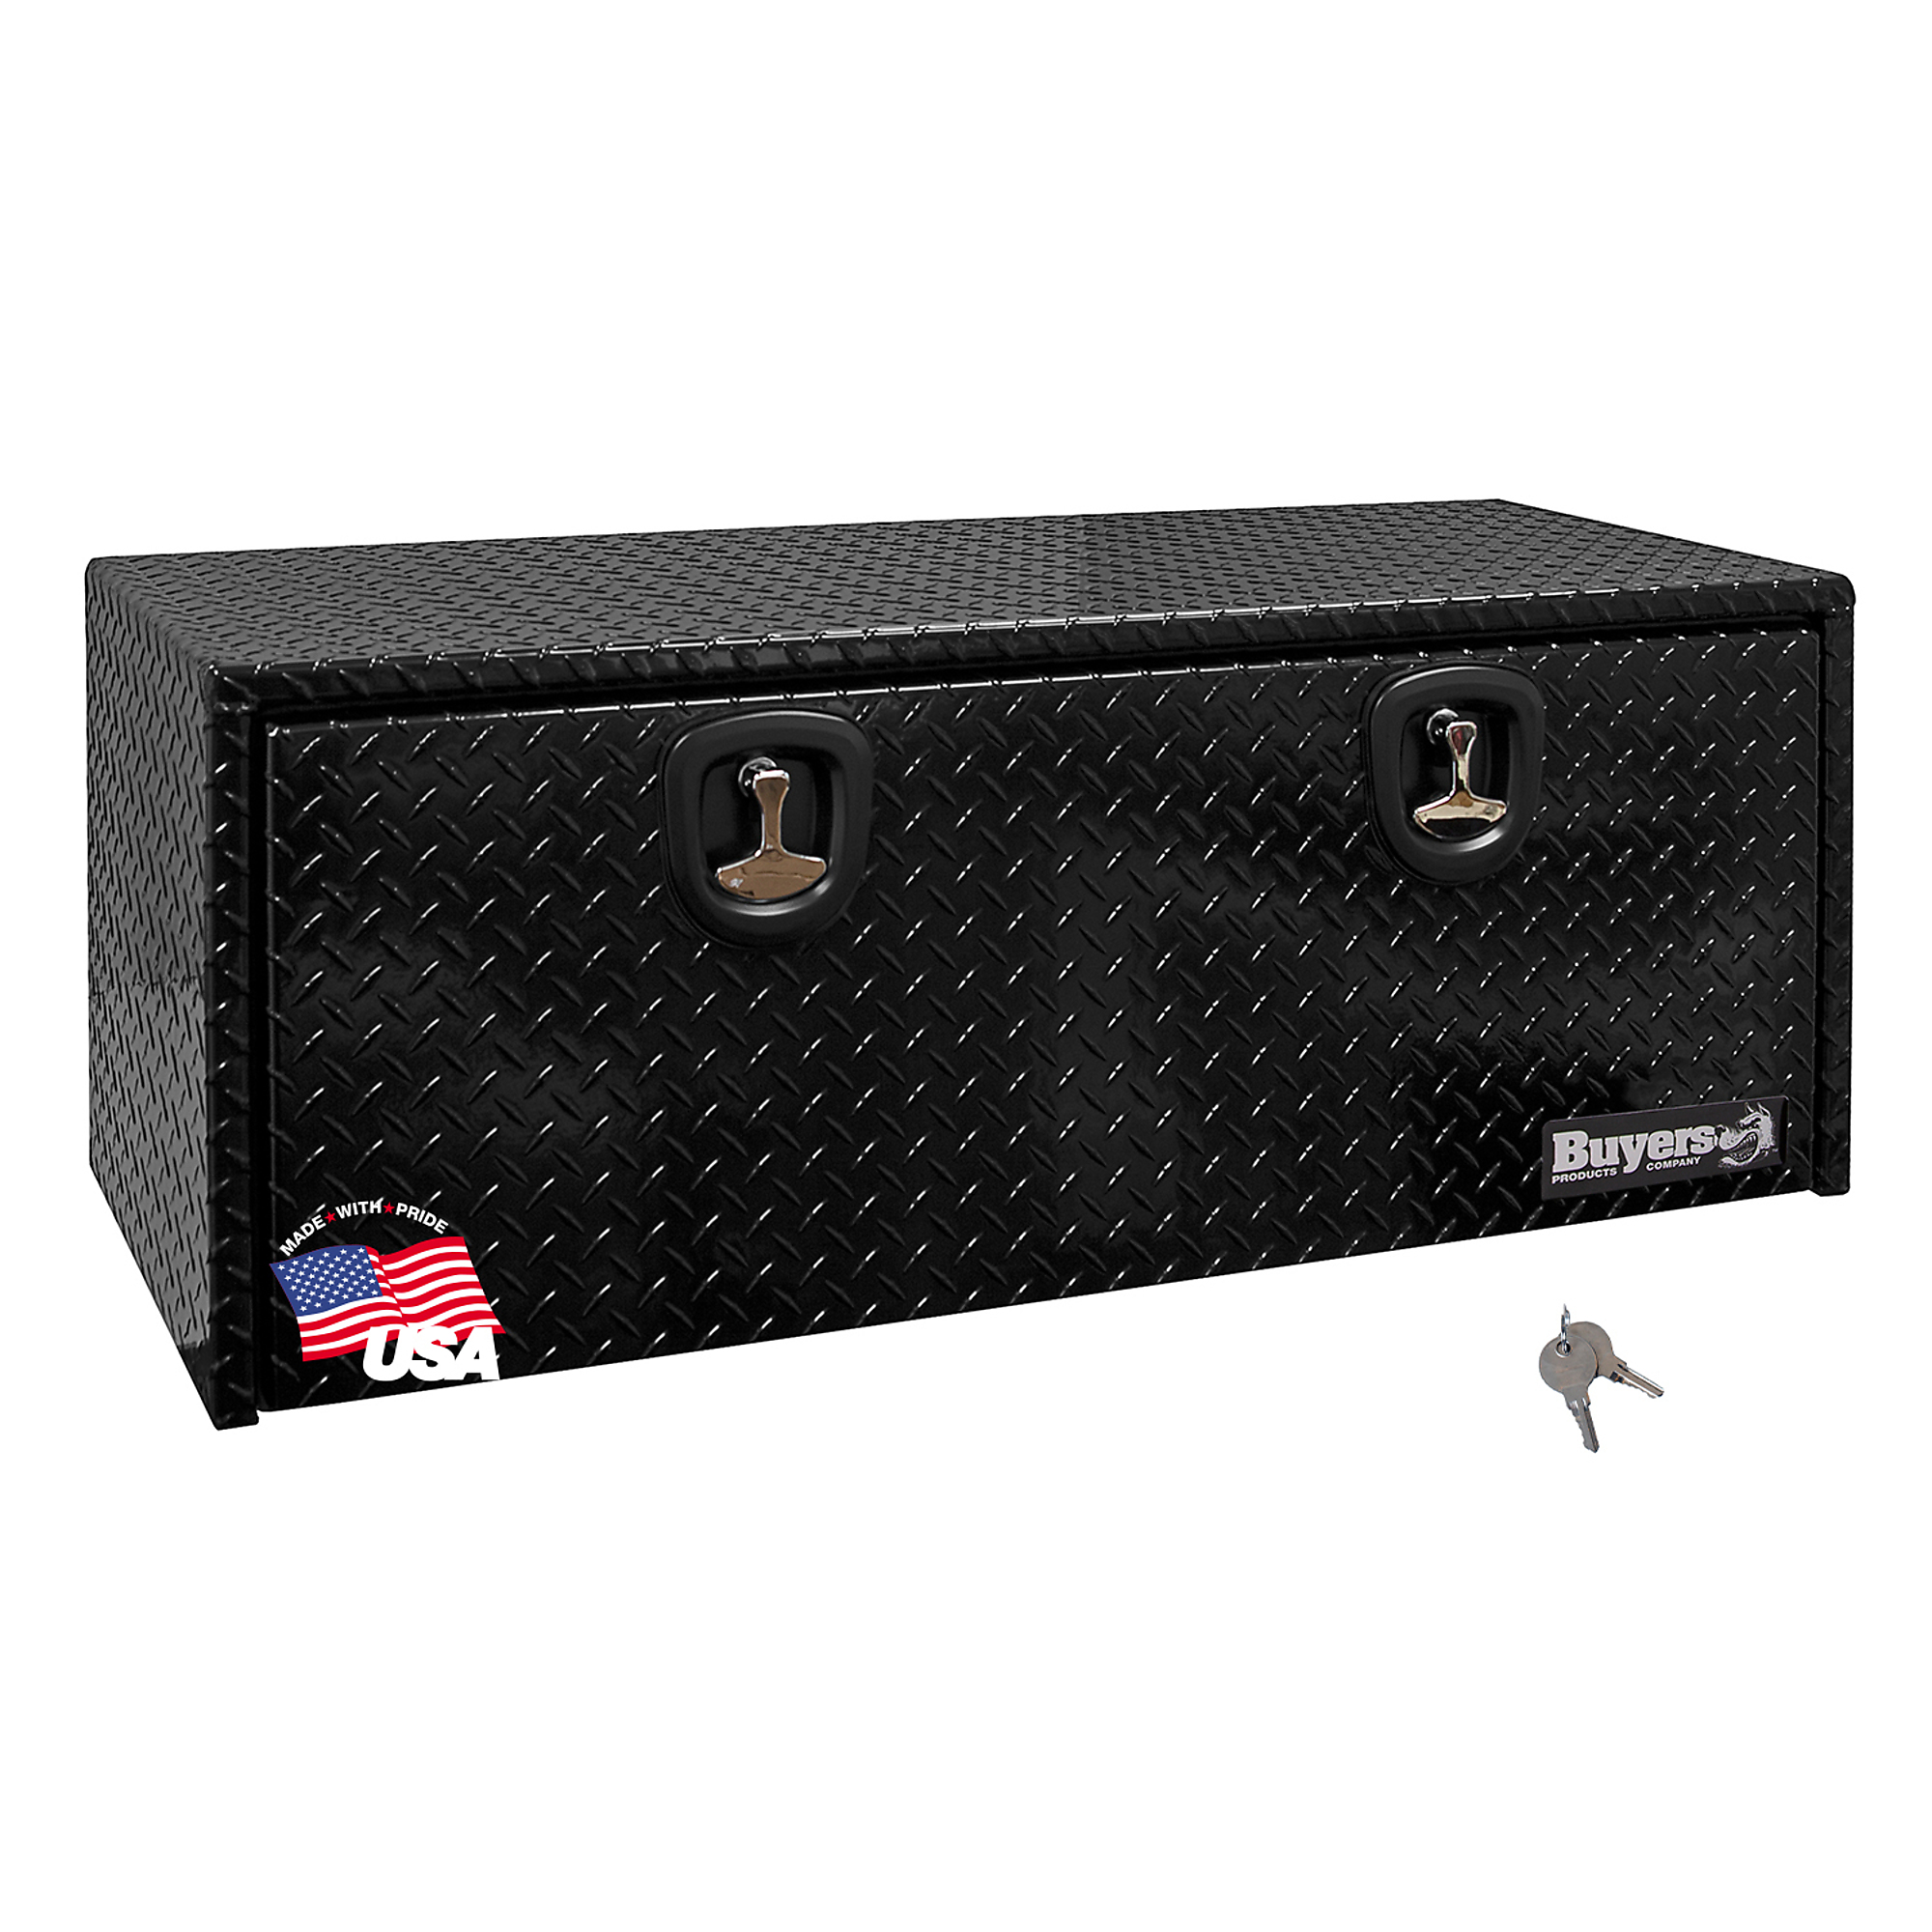 Buyers Products, Underbody Truck Box, Width 72 in, Material Aluminum, Color Finish Diamond Plate Glossy Black, Model 1725147